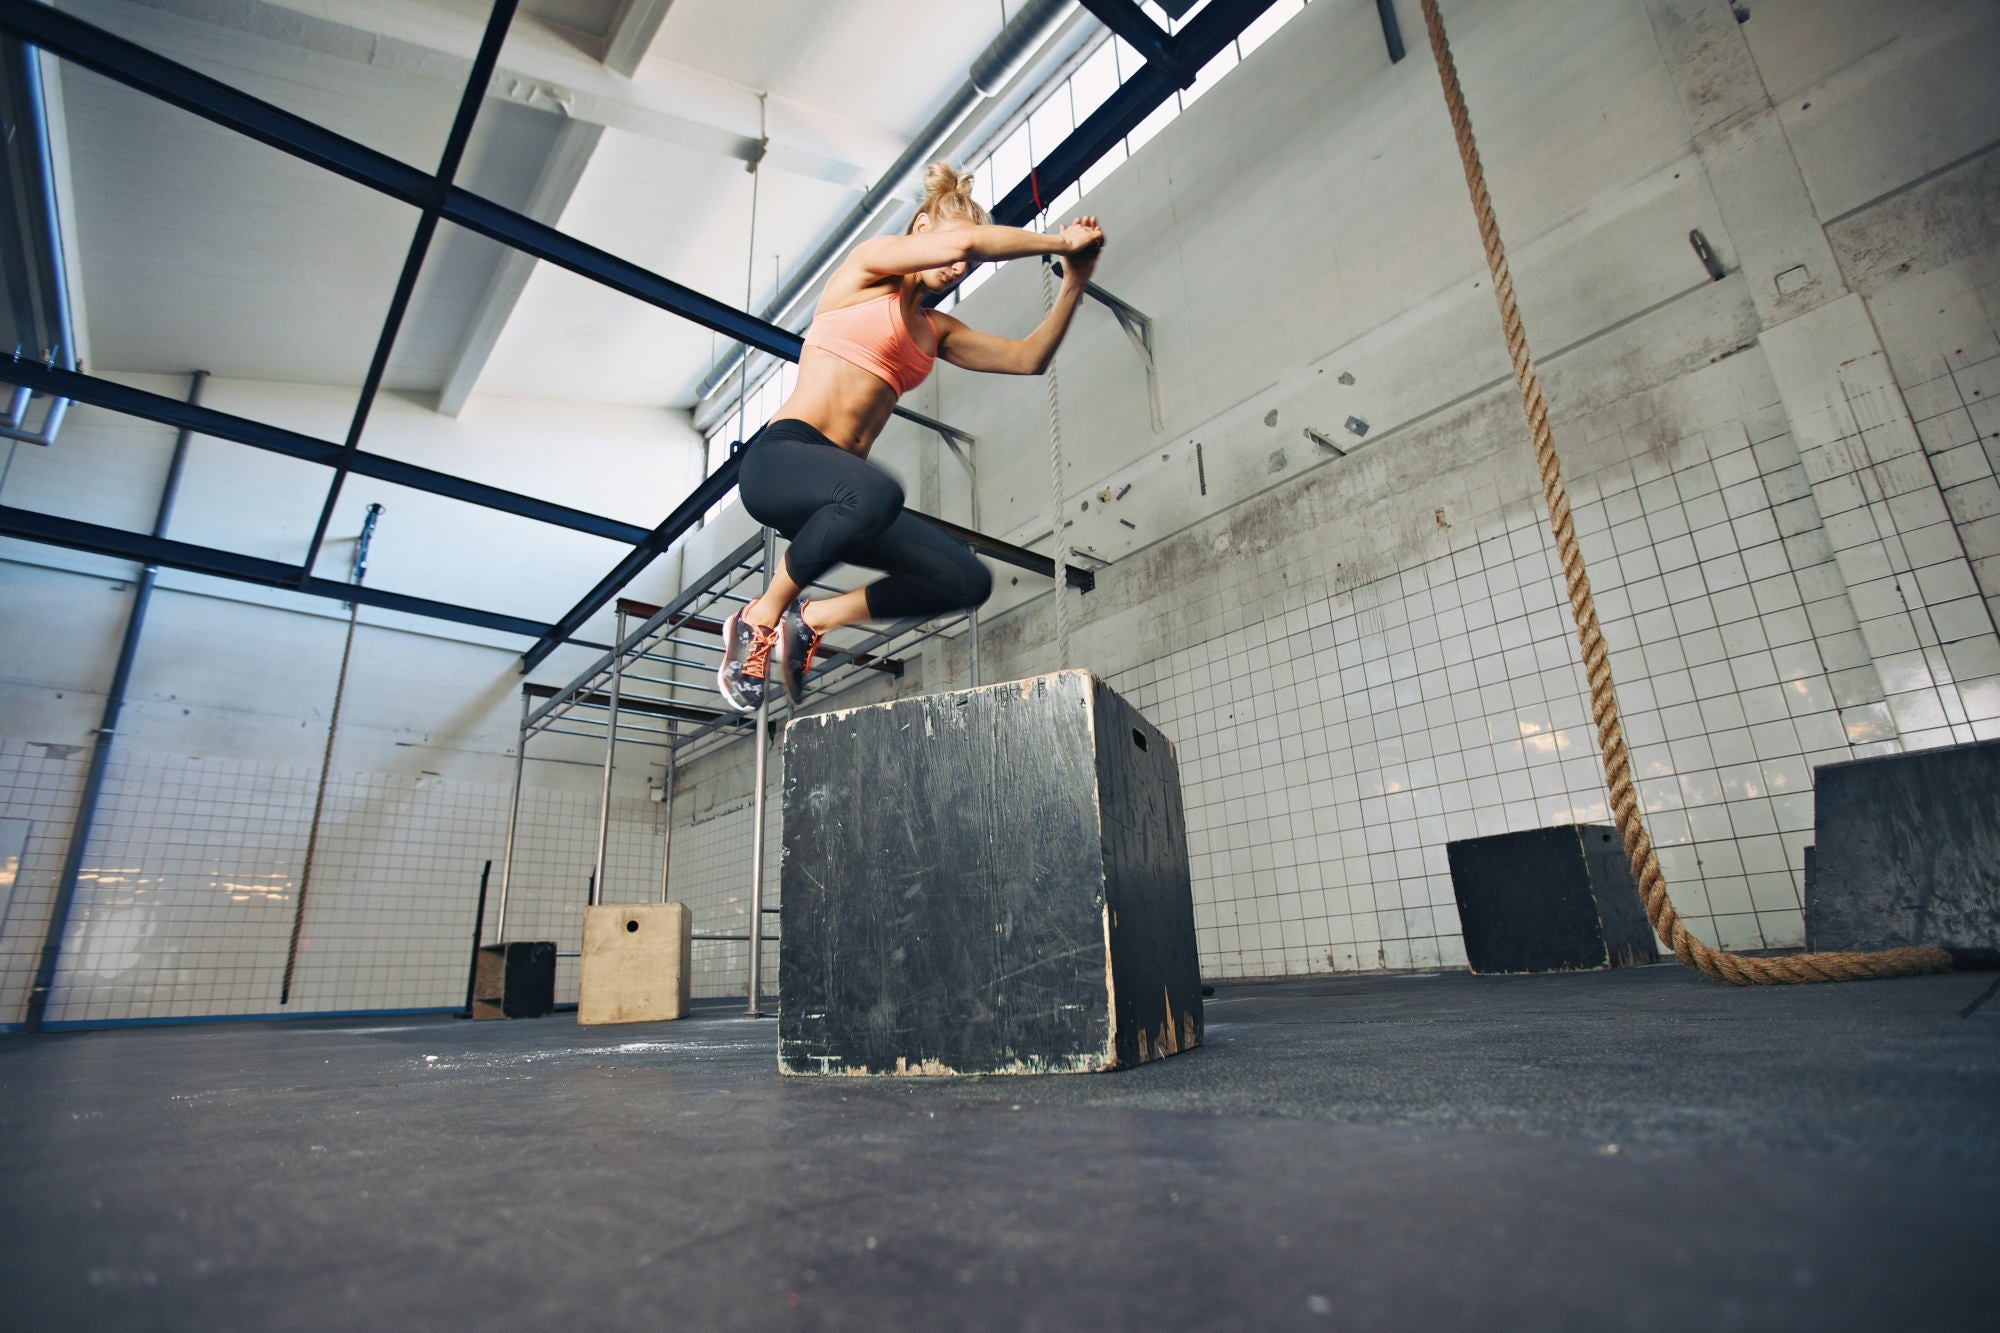 Fit young woman box jumping at a crossfit style gym. Female athlete is performing box jumps at gym.